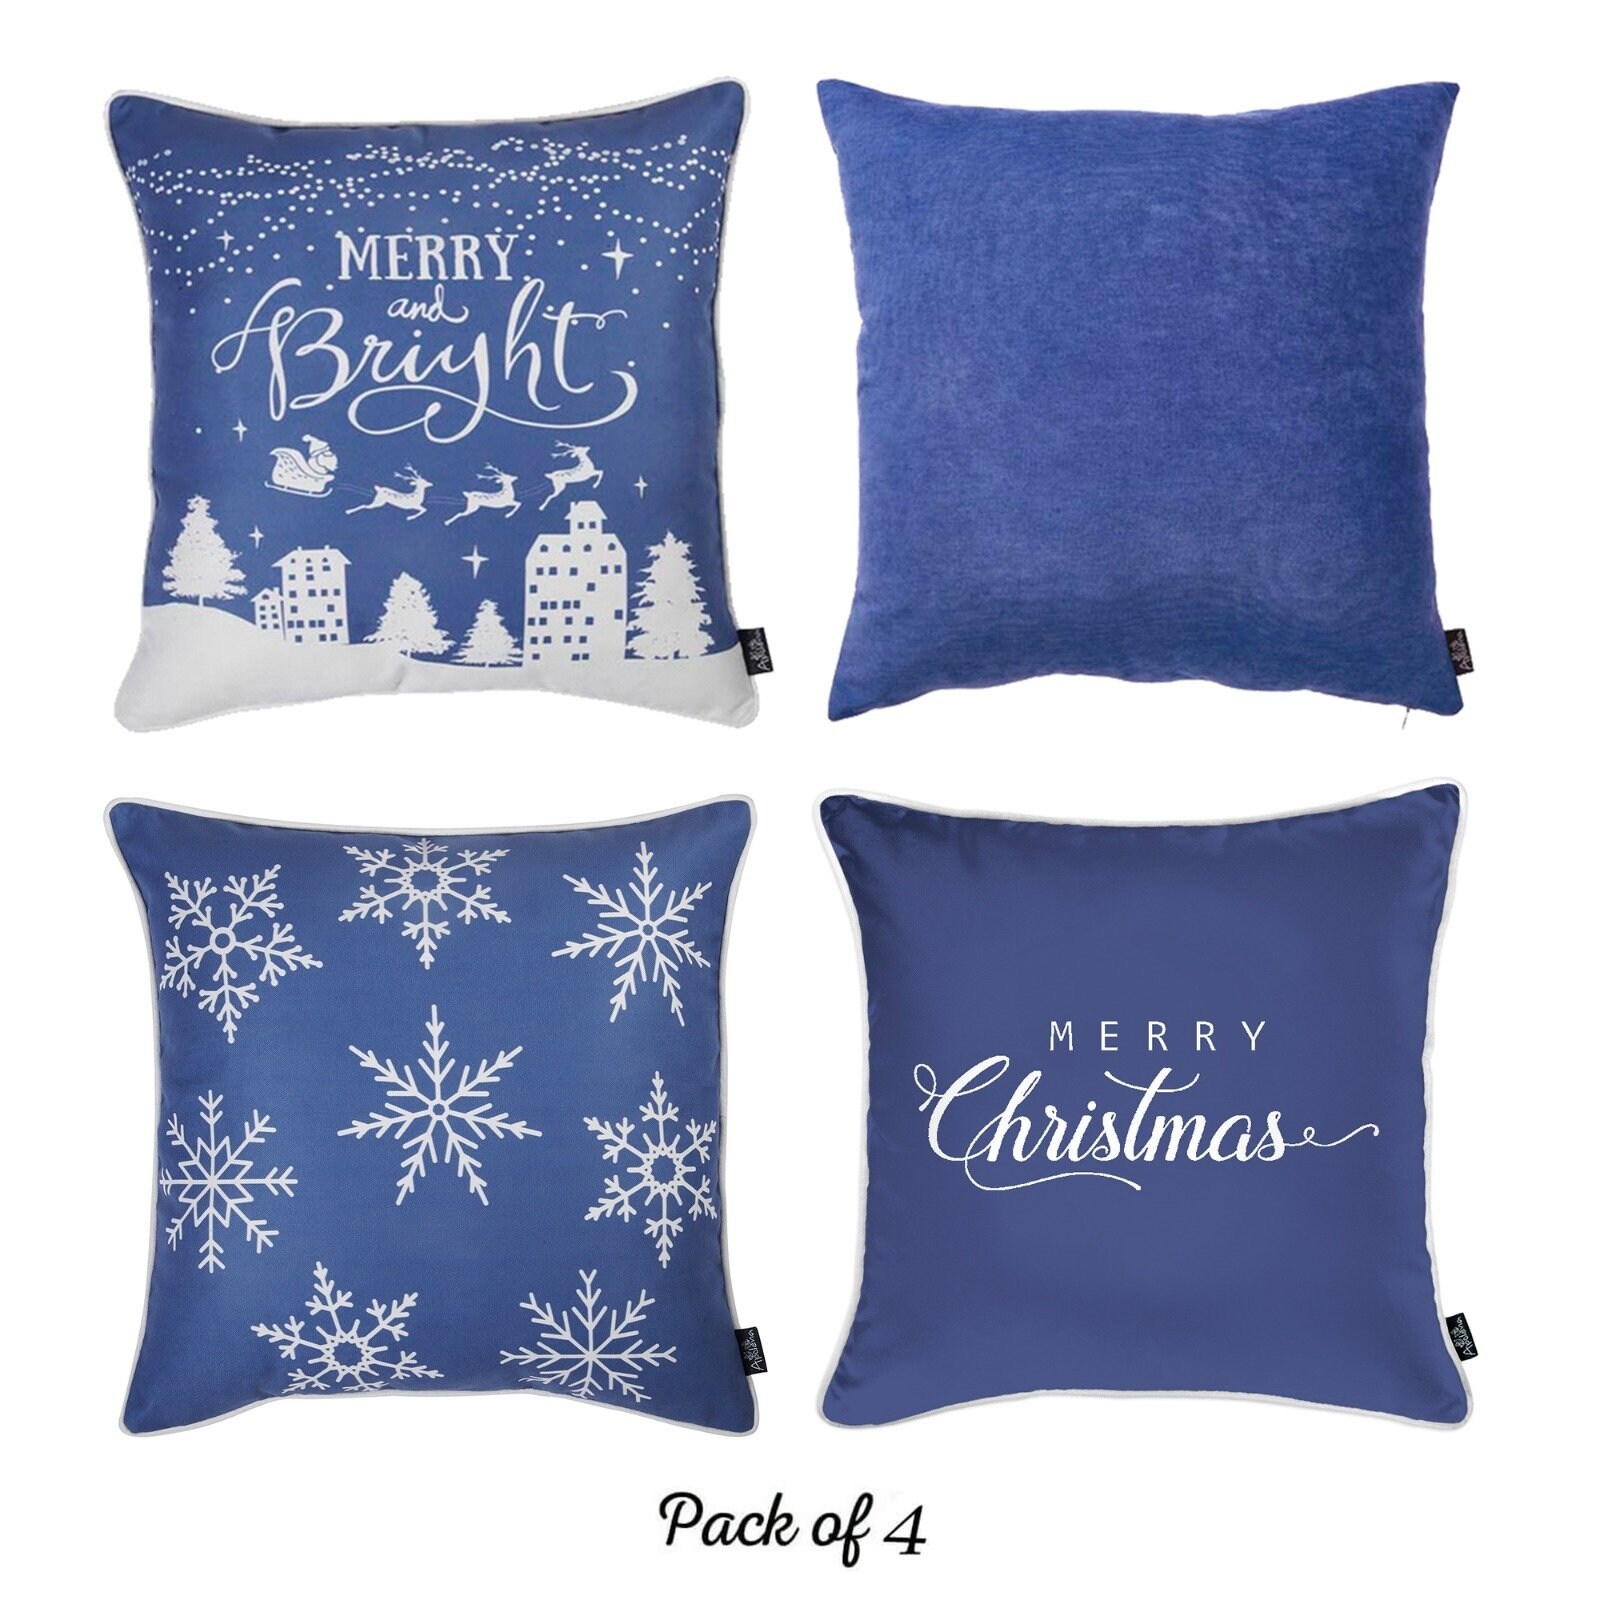 https://ak1.ostkcdn.com/images/products/is/images/direct/48667174dde94a52ecf66cf94367c42b1b4fd20c/Merry-Christmas-Set-of-4-Throw-Pillow-Covers-Christmas-Gift-18%22x18%22.jpg